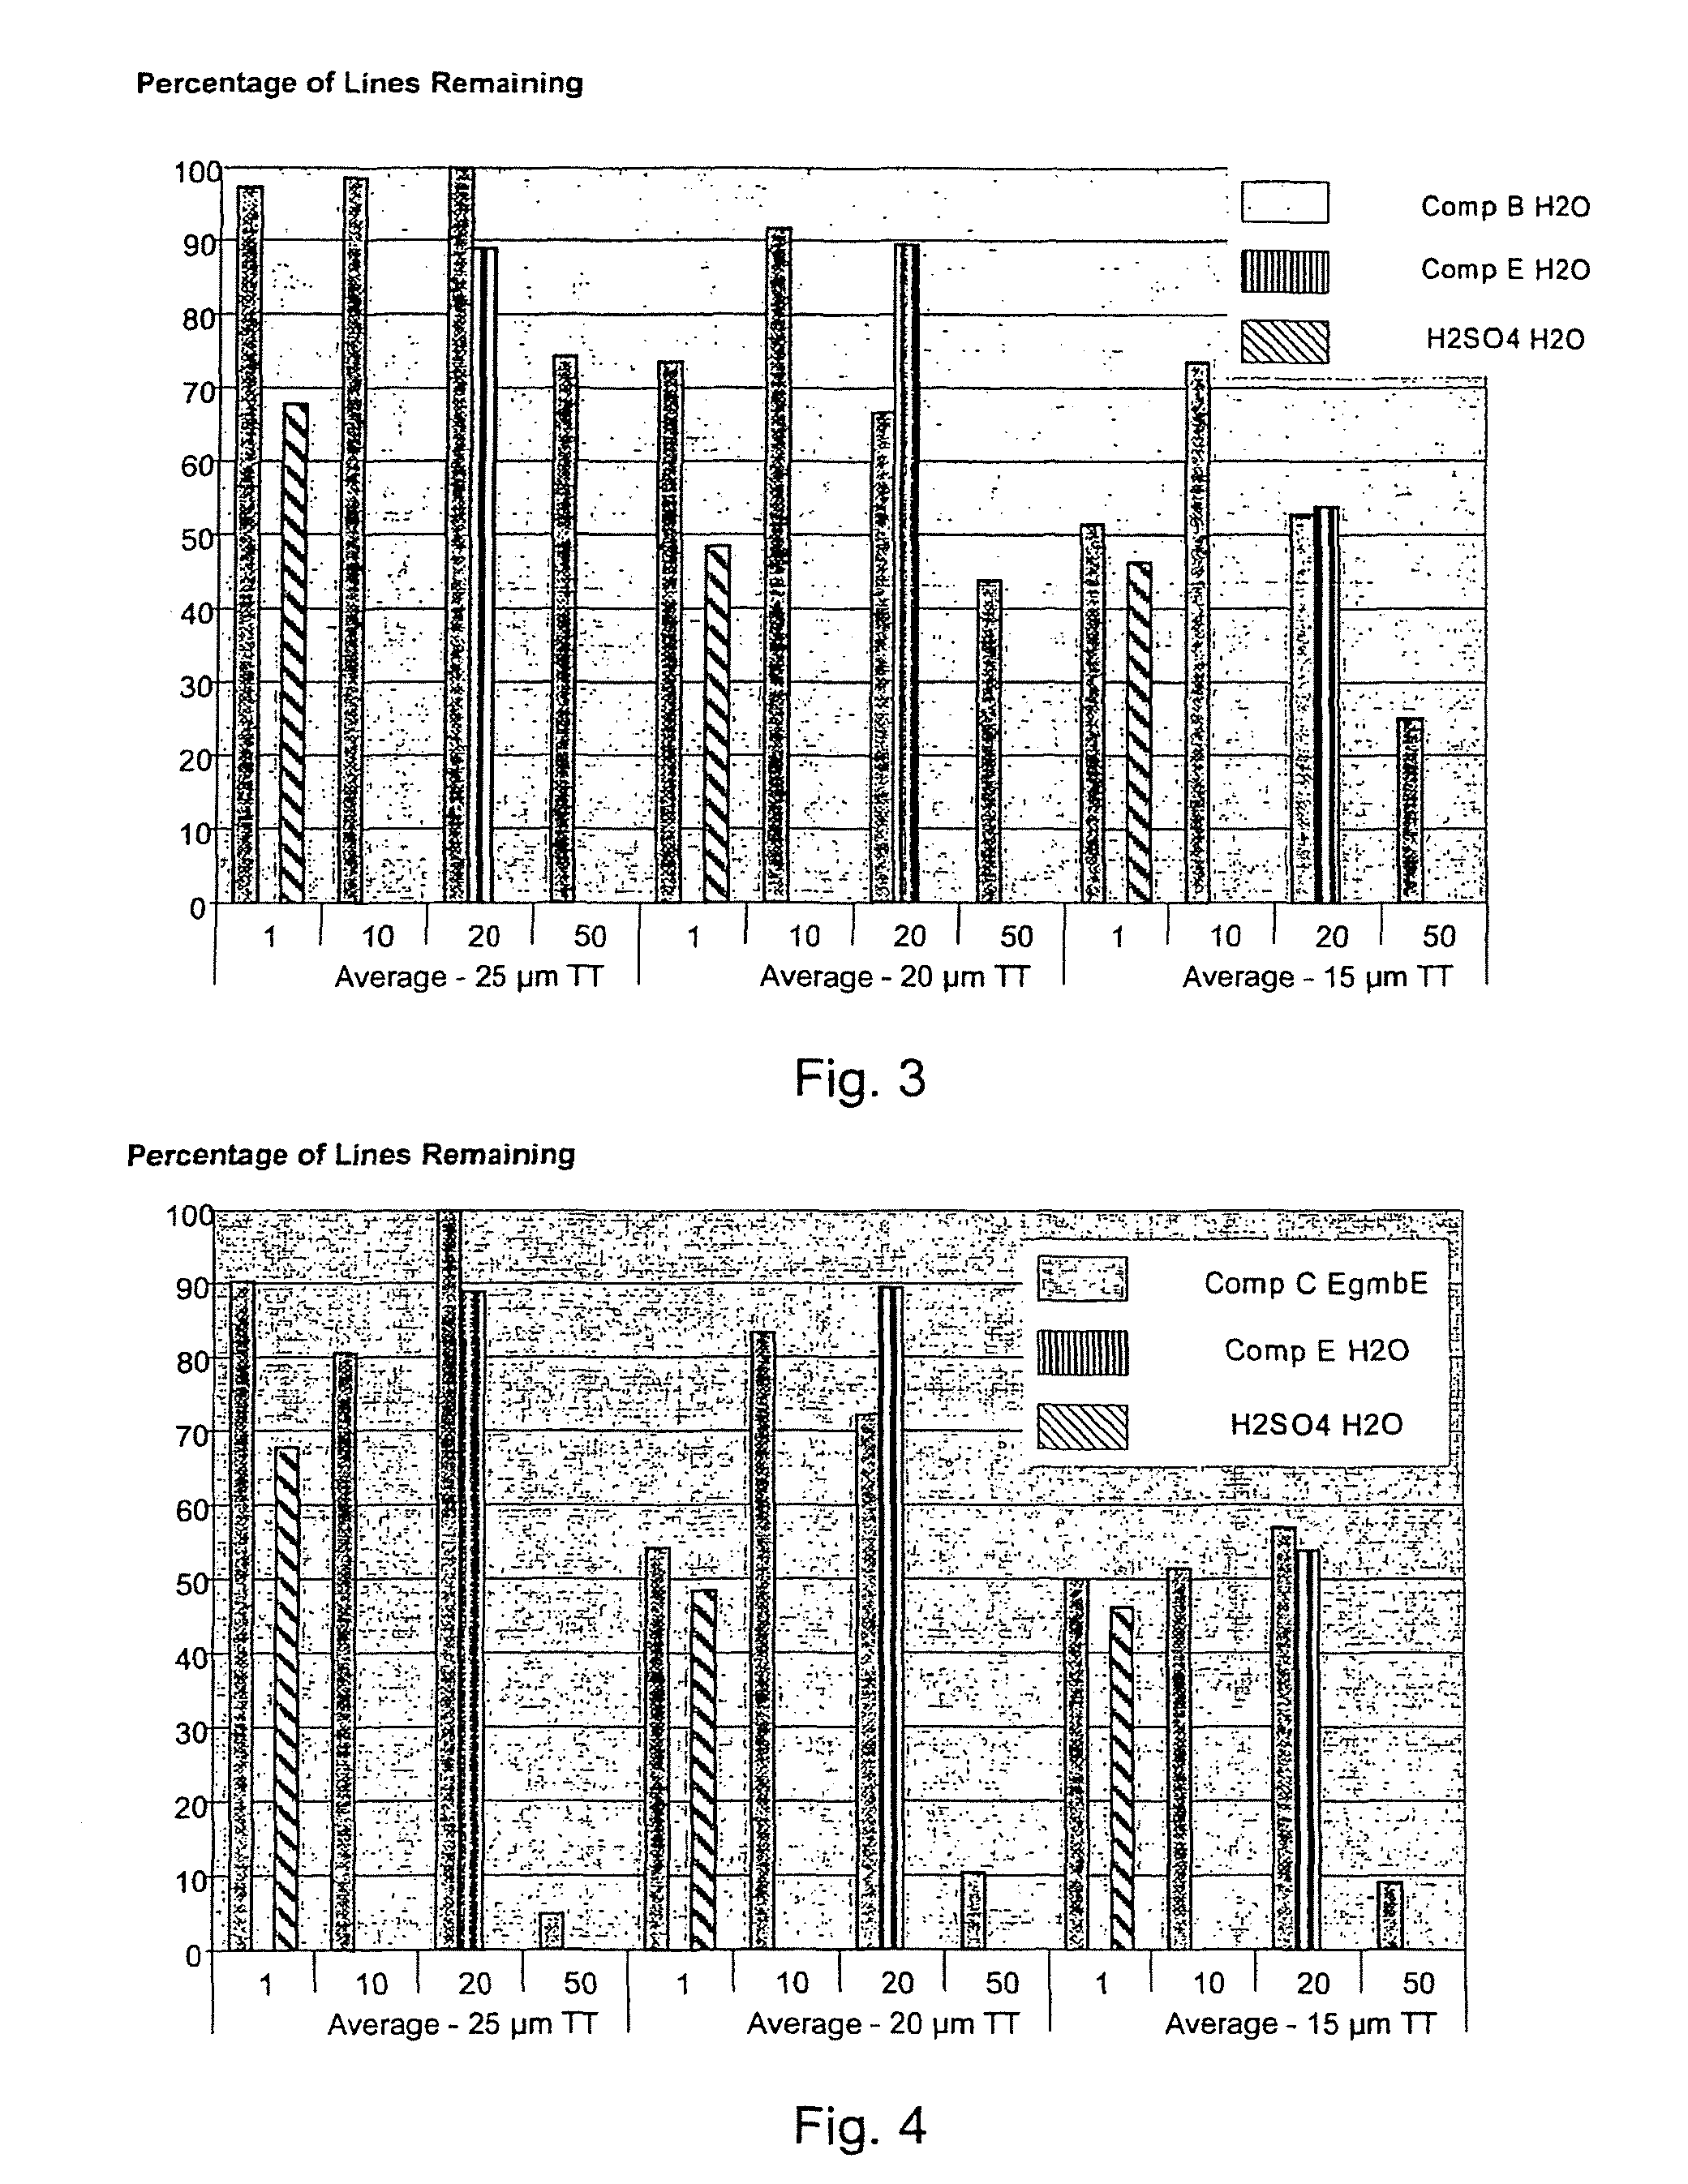 Non-etching non-resist adhesion composition and method of preparing a work piece